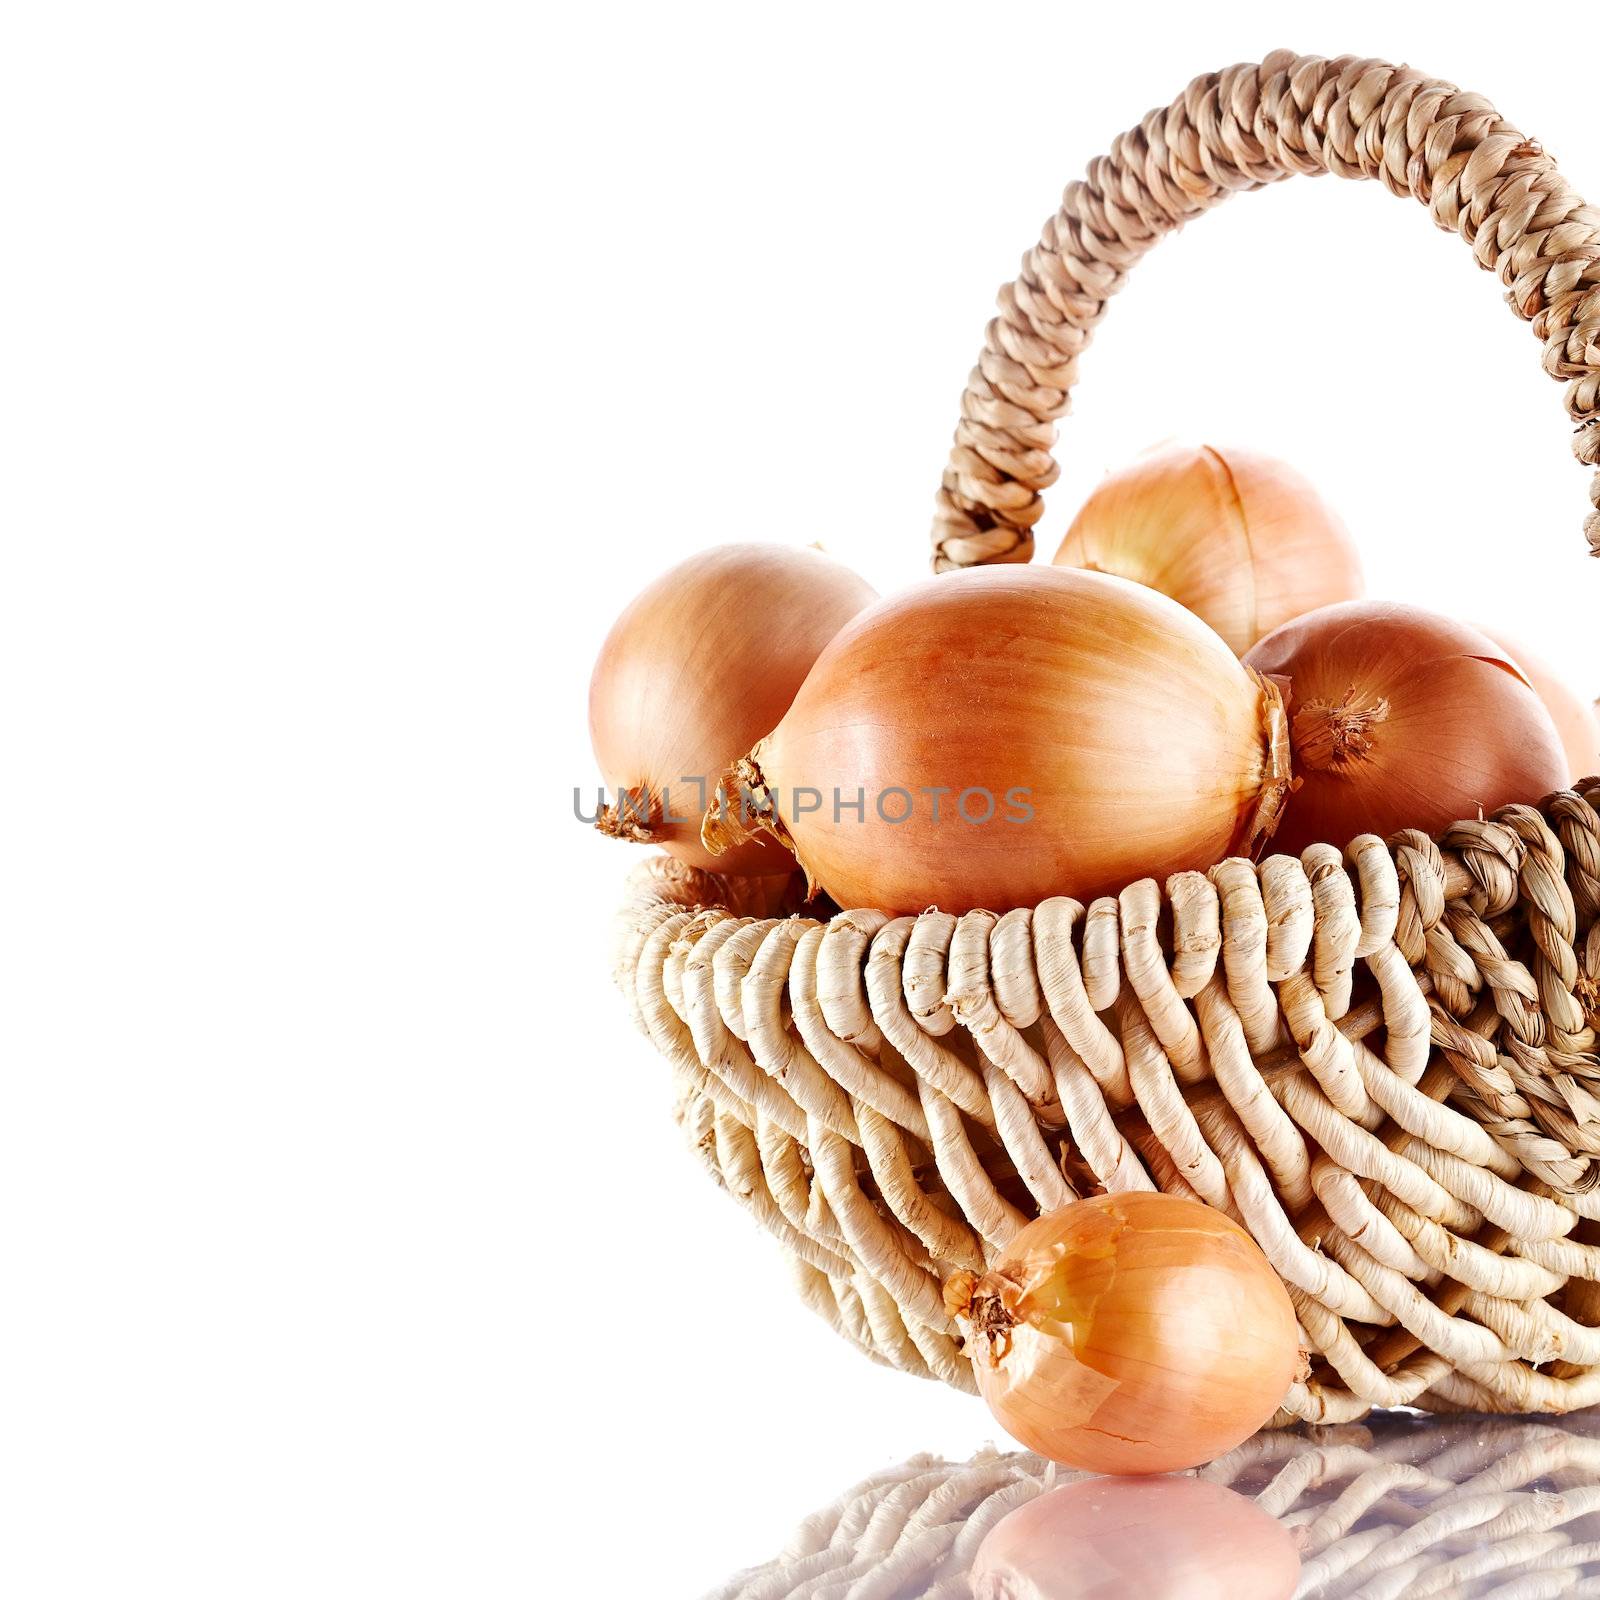 Onions napiform in a wattled basket. Onions napiform. Vegetables in a basket.